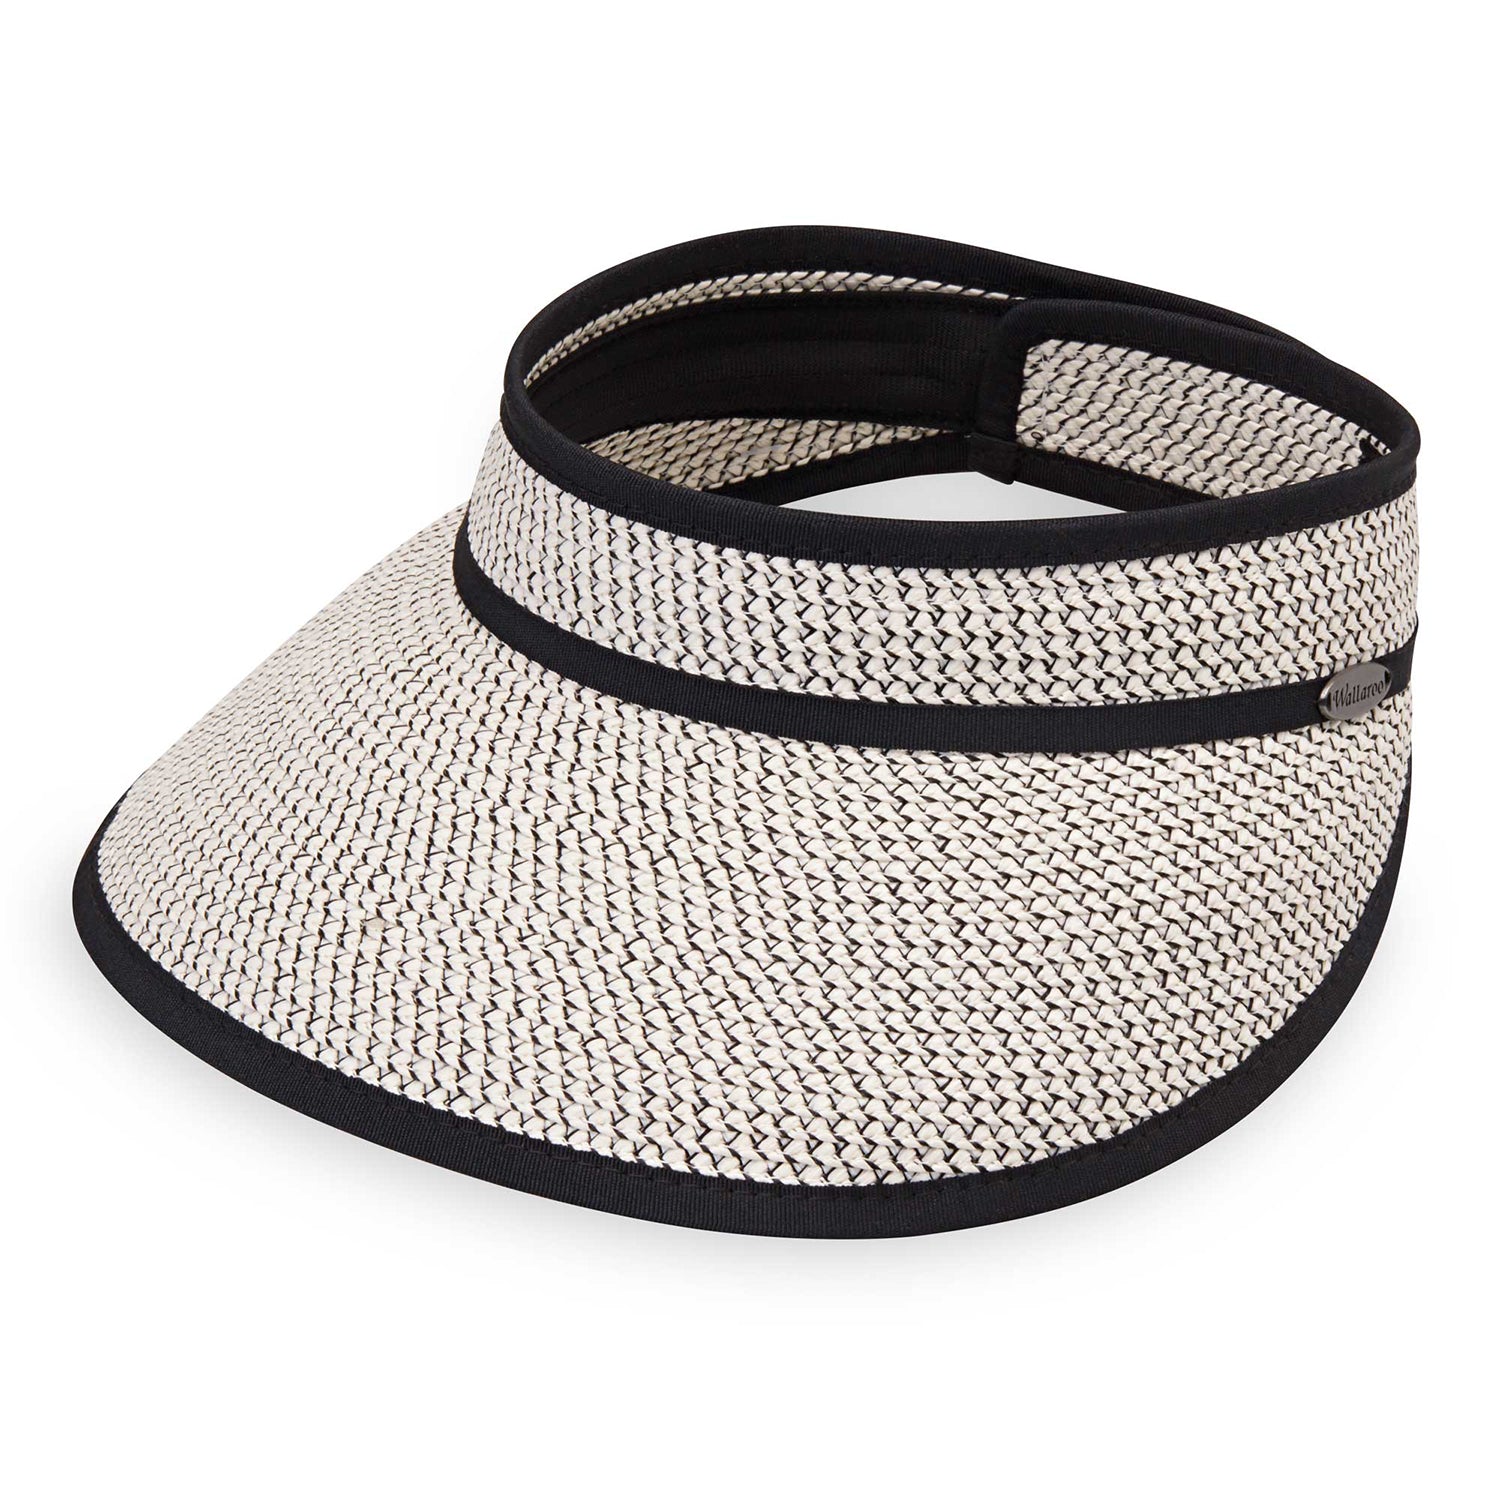 Featuring women's Charlie sun visor by Wallaroo featuring adjustable velcro and is packable